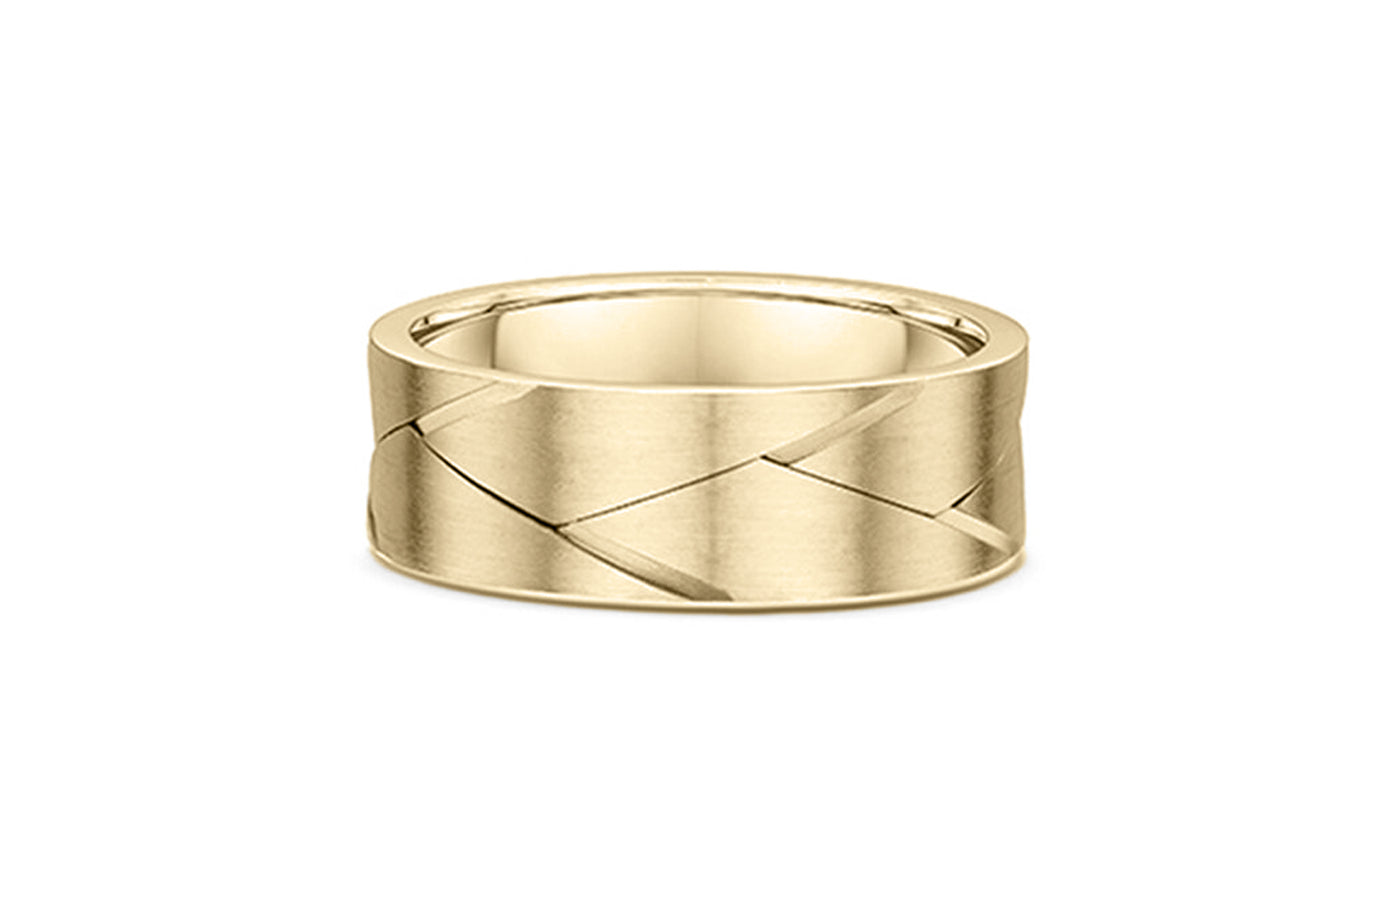 Carved Woven Pattern Brushed Finish Band in Yellow Gold